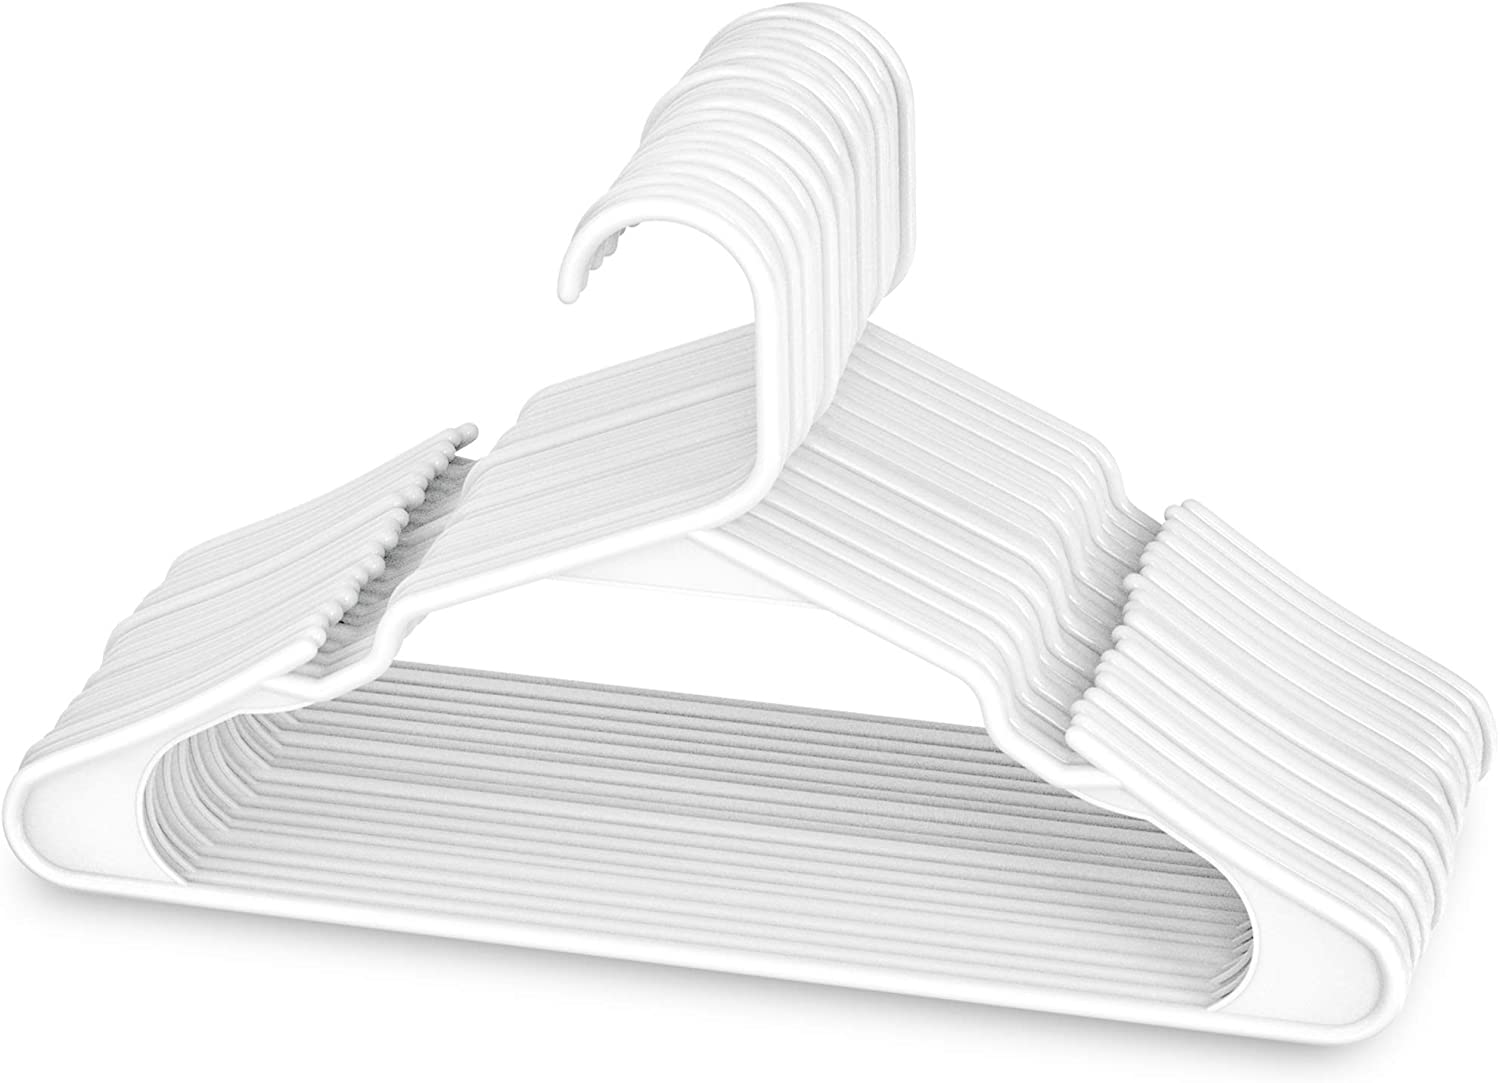 https://www.dontwasteyourmoney.com/wp-content/uploads/2021/03/sharpty-plastic-clothing-notched-hangers-20-pack-white-hangers.jpg